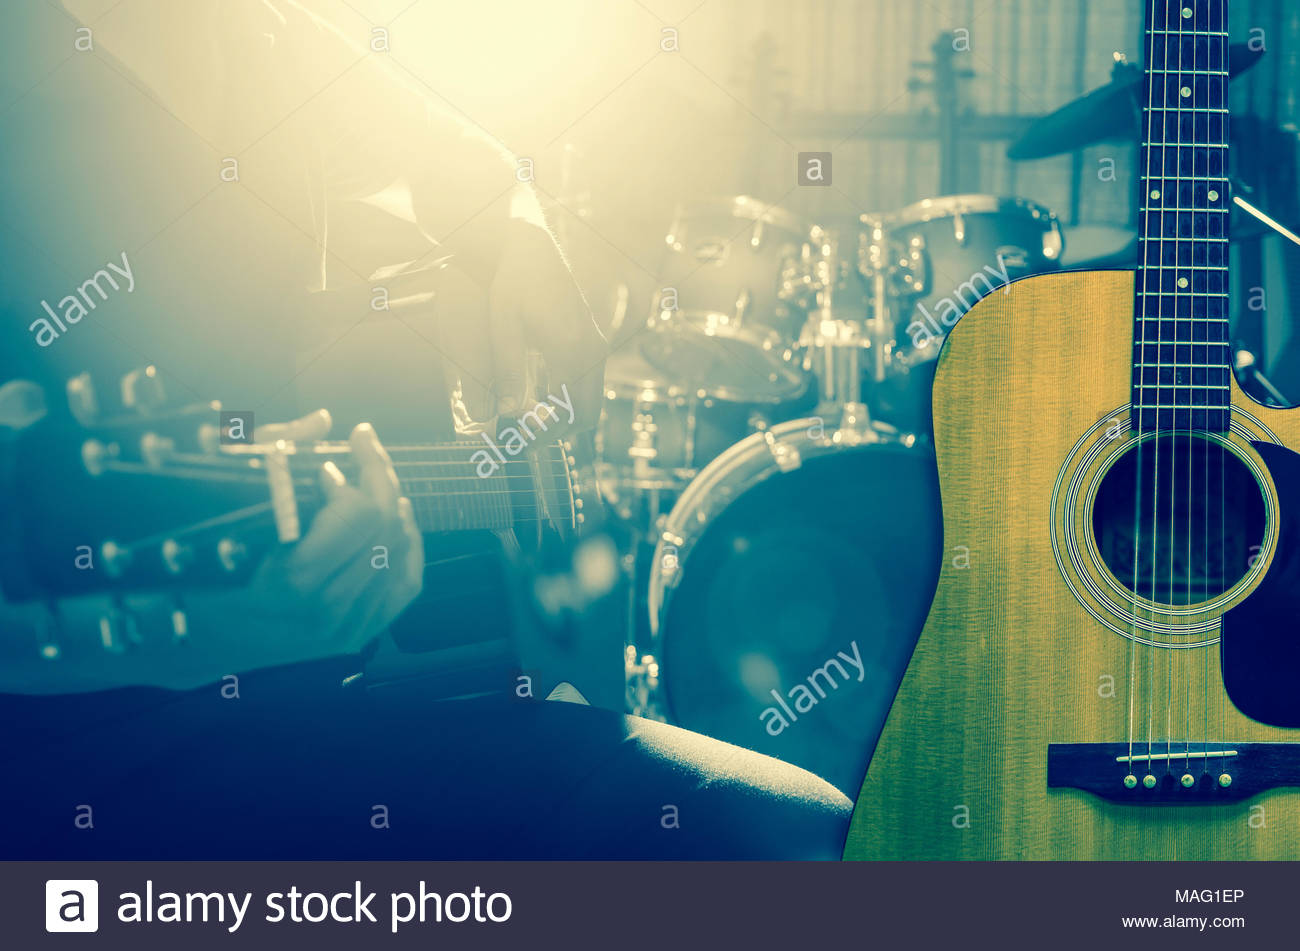 Guitar On Music Band Background Musical Concept Stock Photo